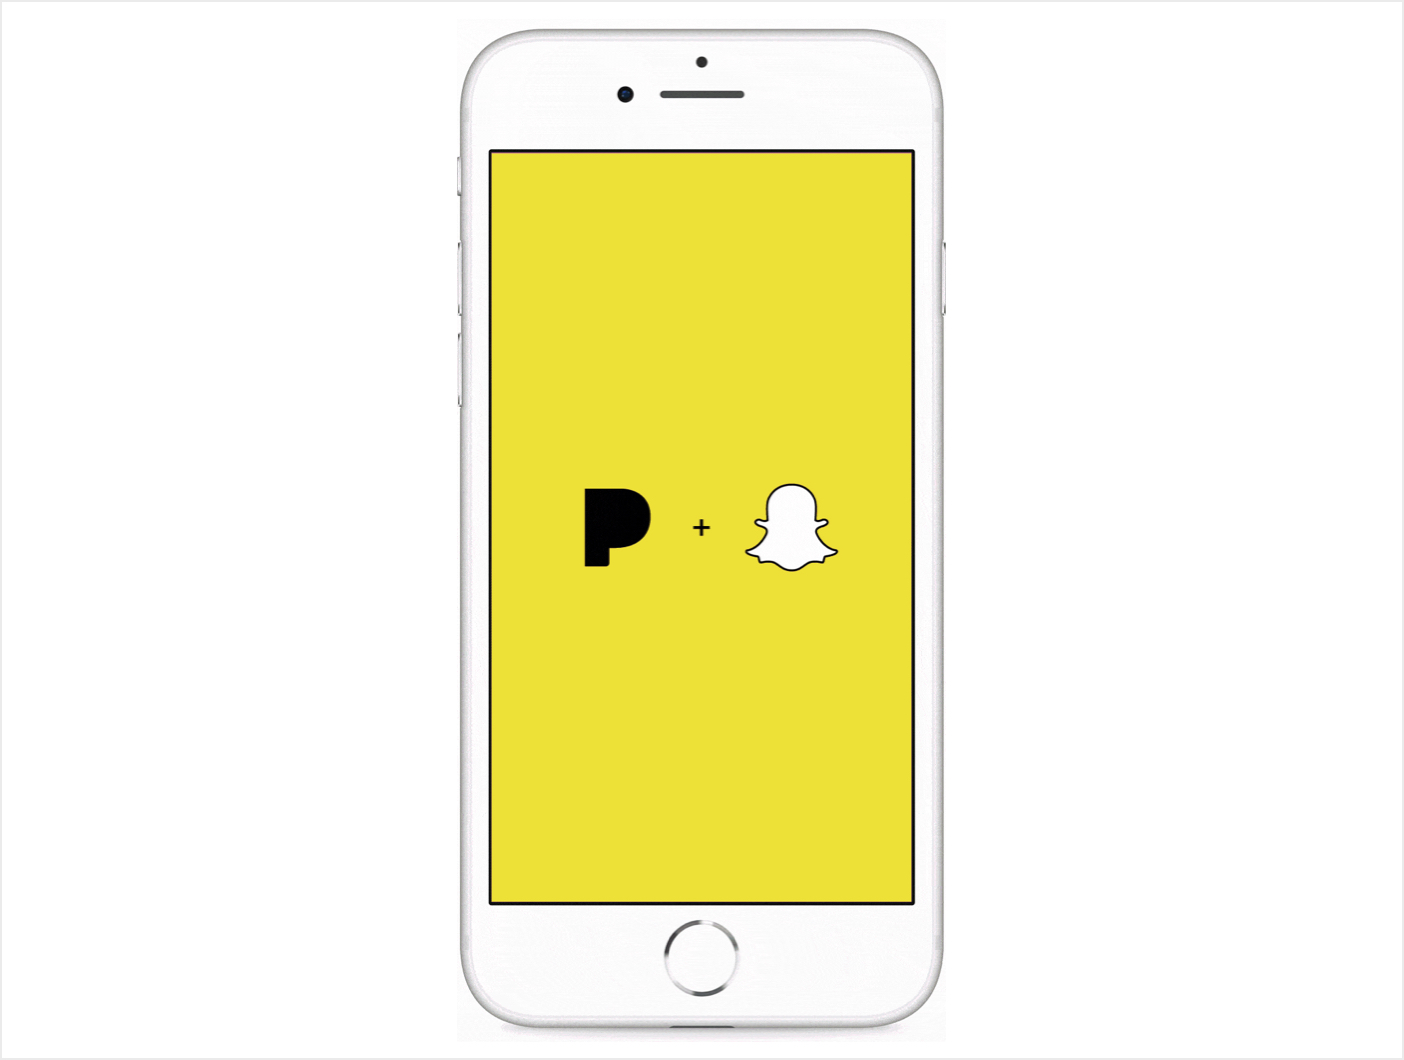 photo of Pandora users can share music to their Snapchat stories image